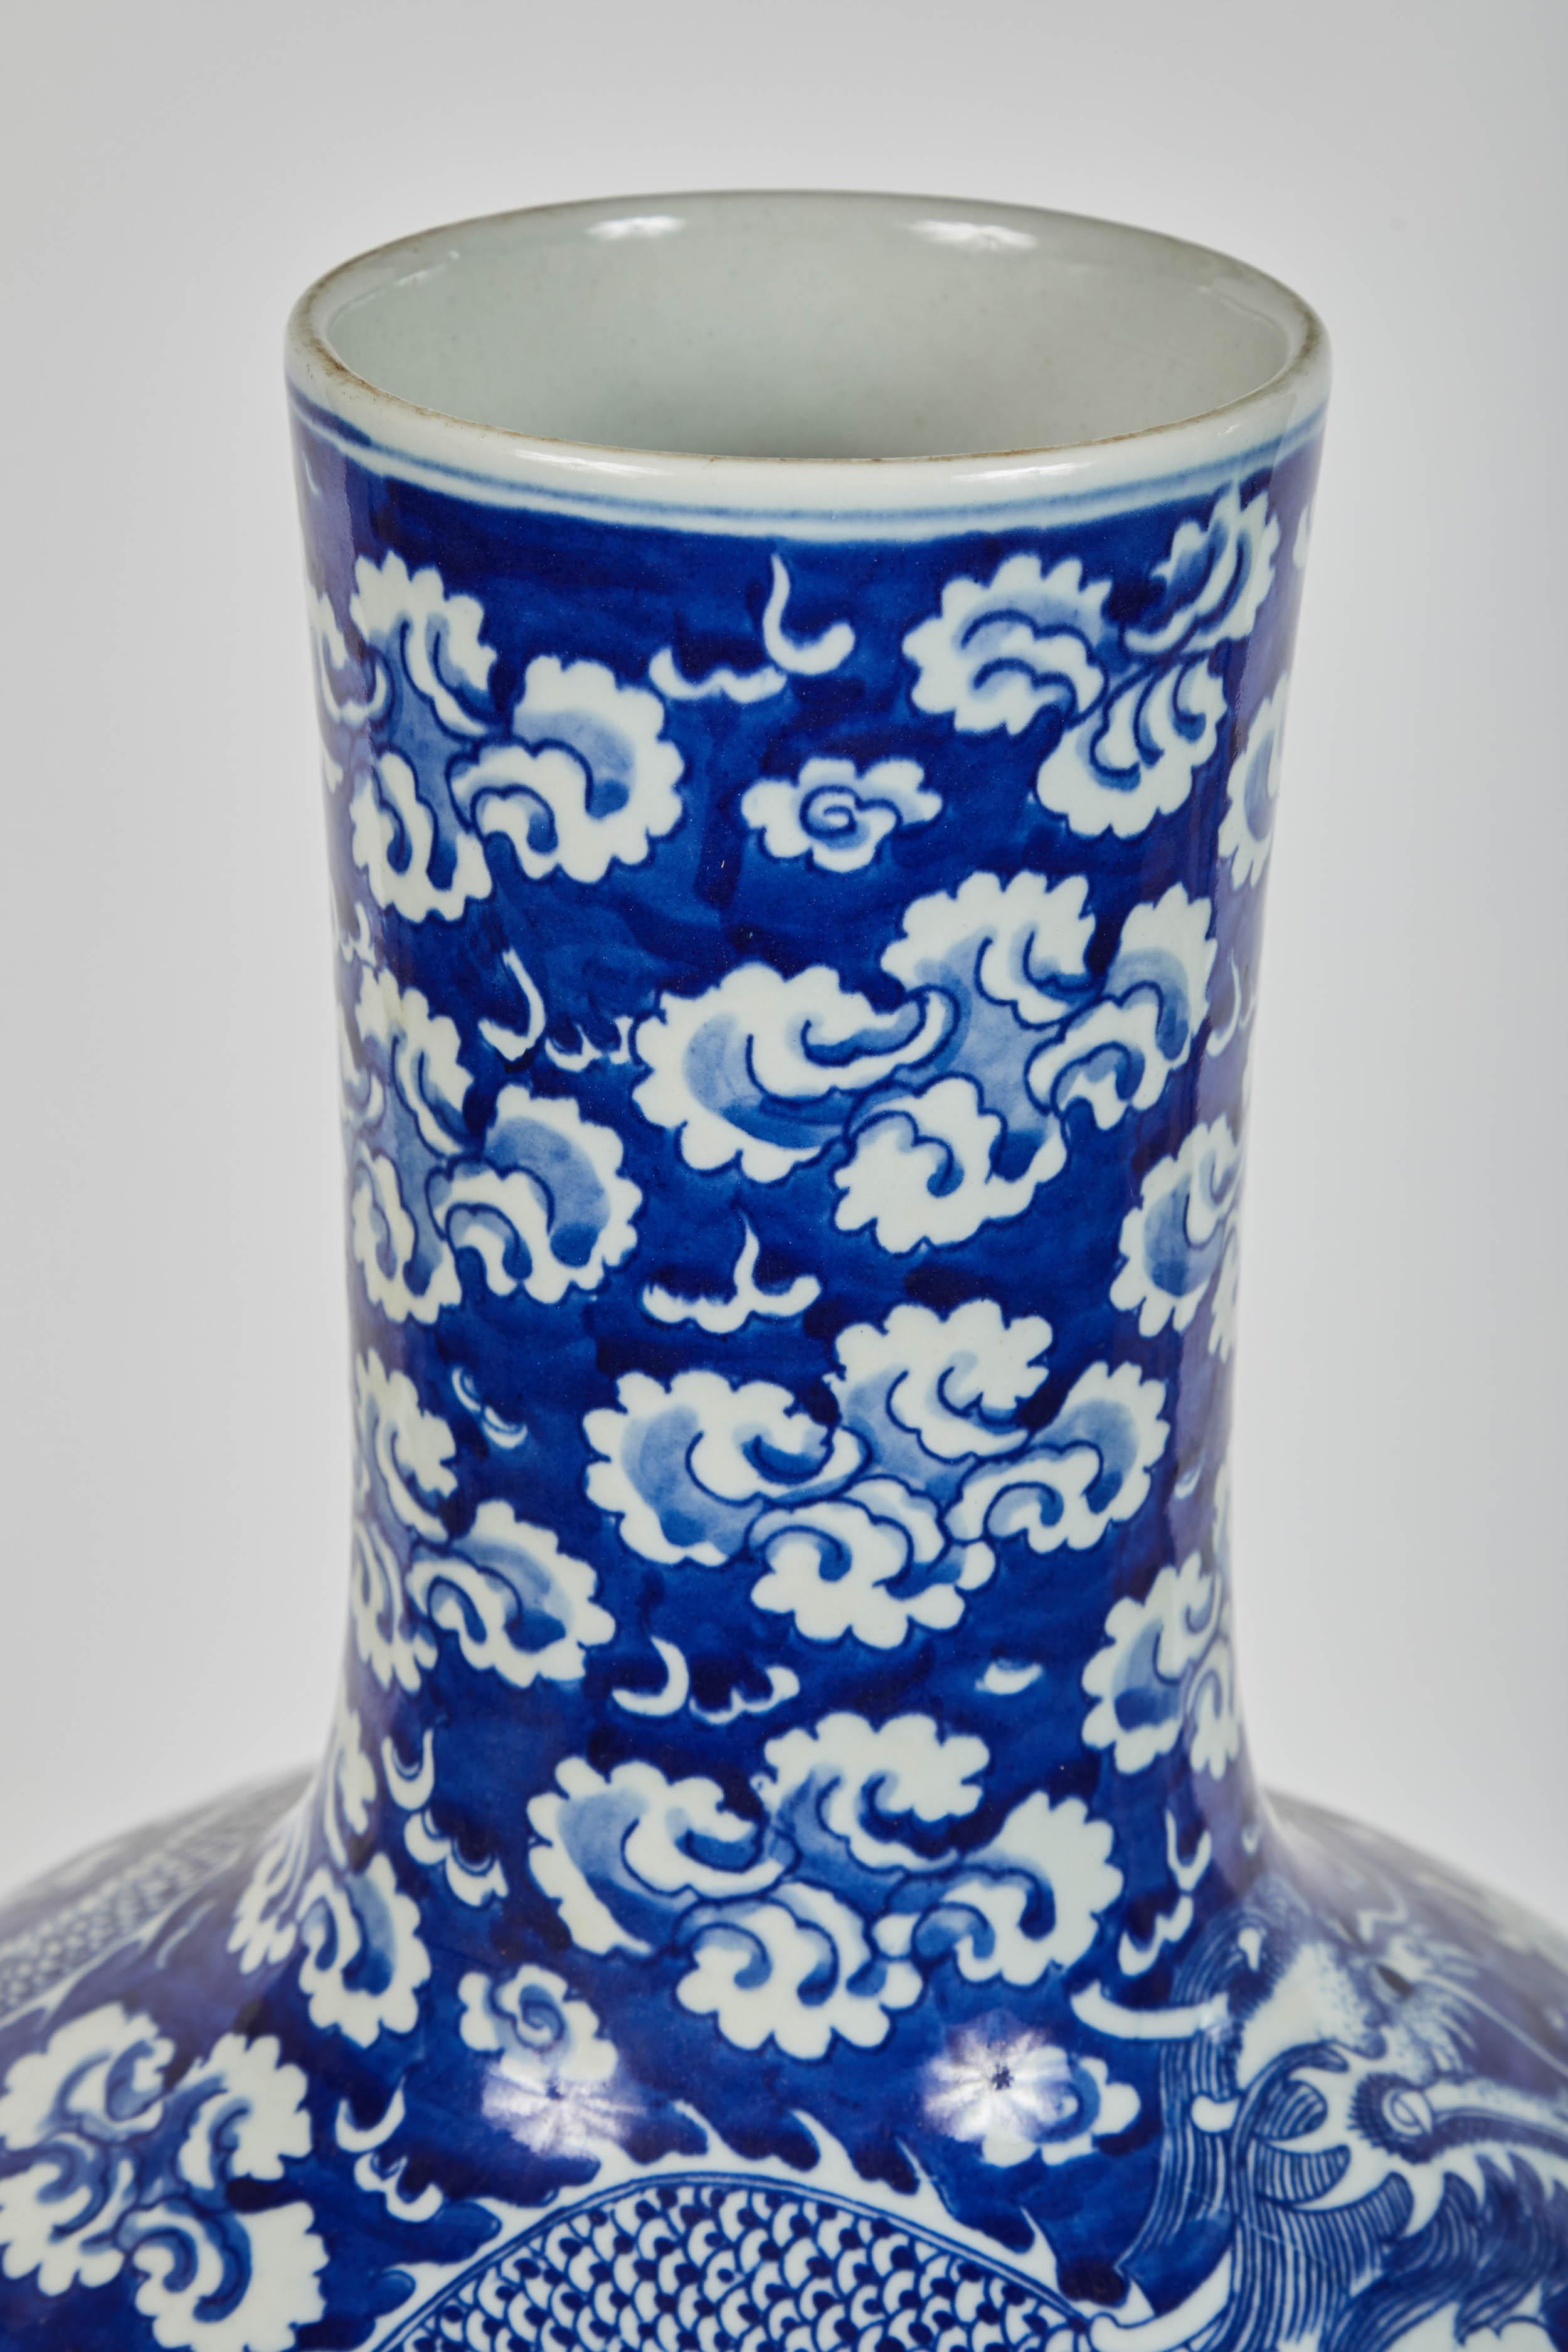 Fine porcelain Chinese mid-20th century blue and white traditional gourd shaped vase, featuring a large four-clawed dragon. Beautiful cloud motif throughout.